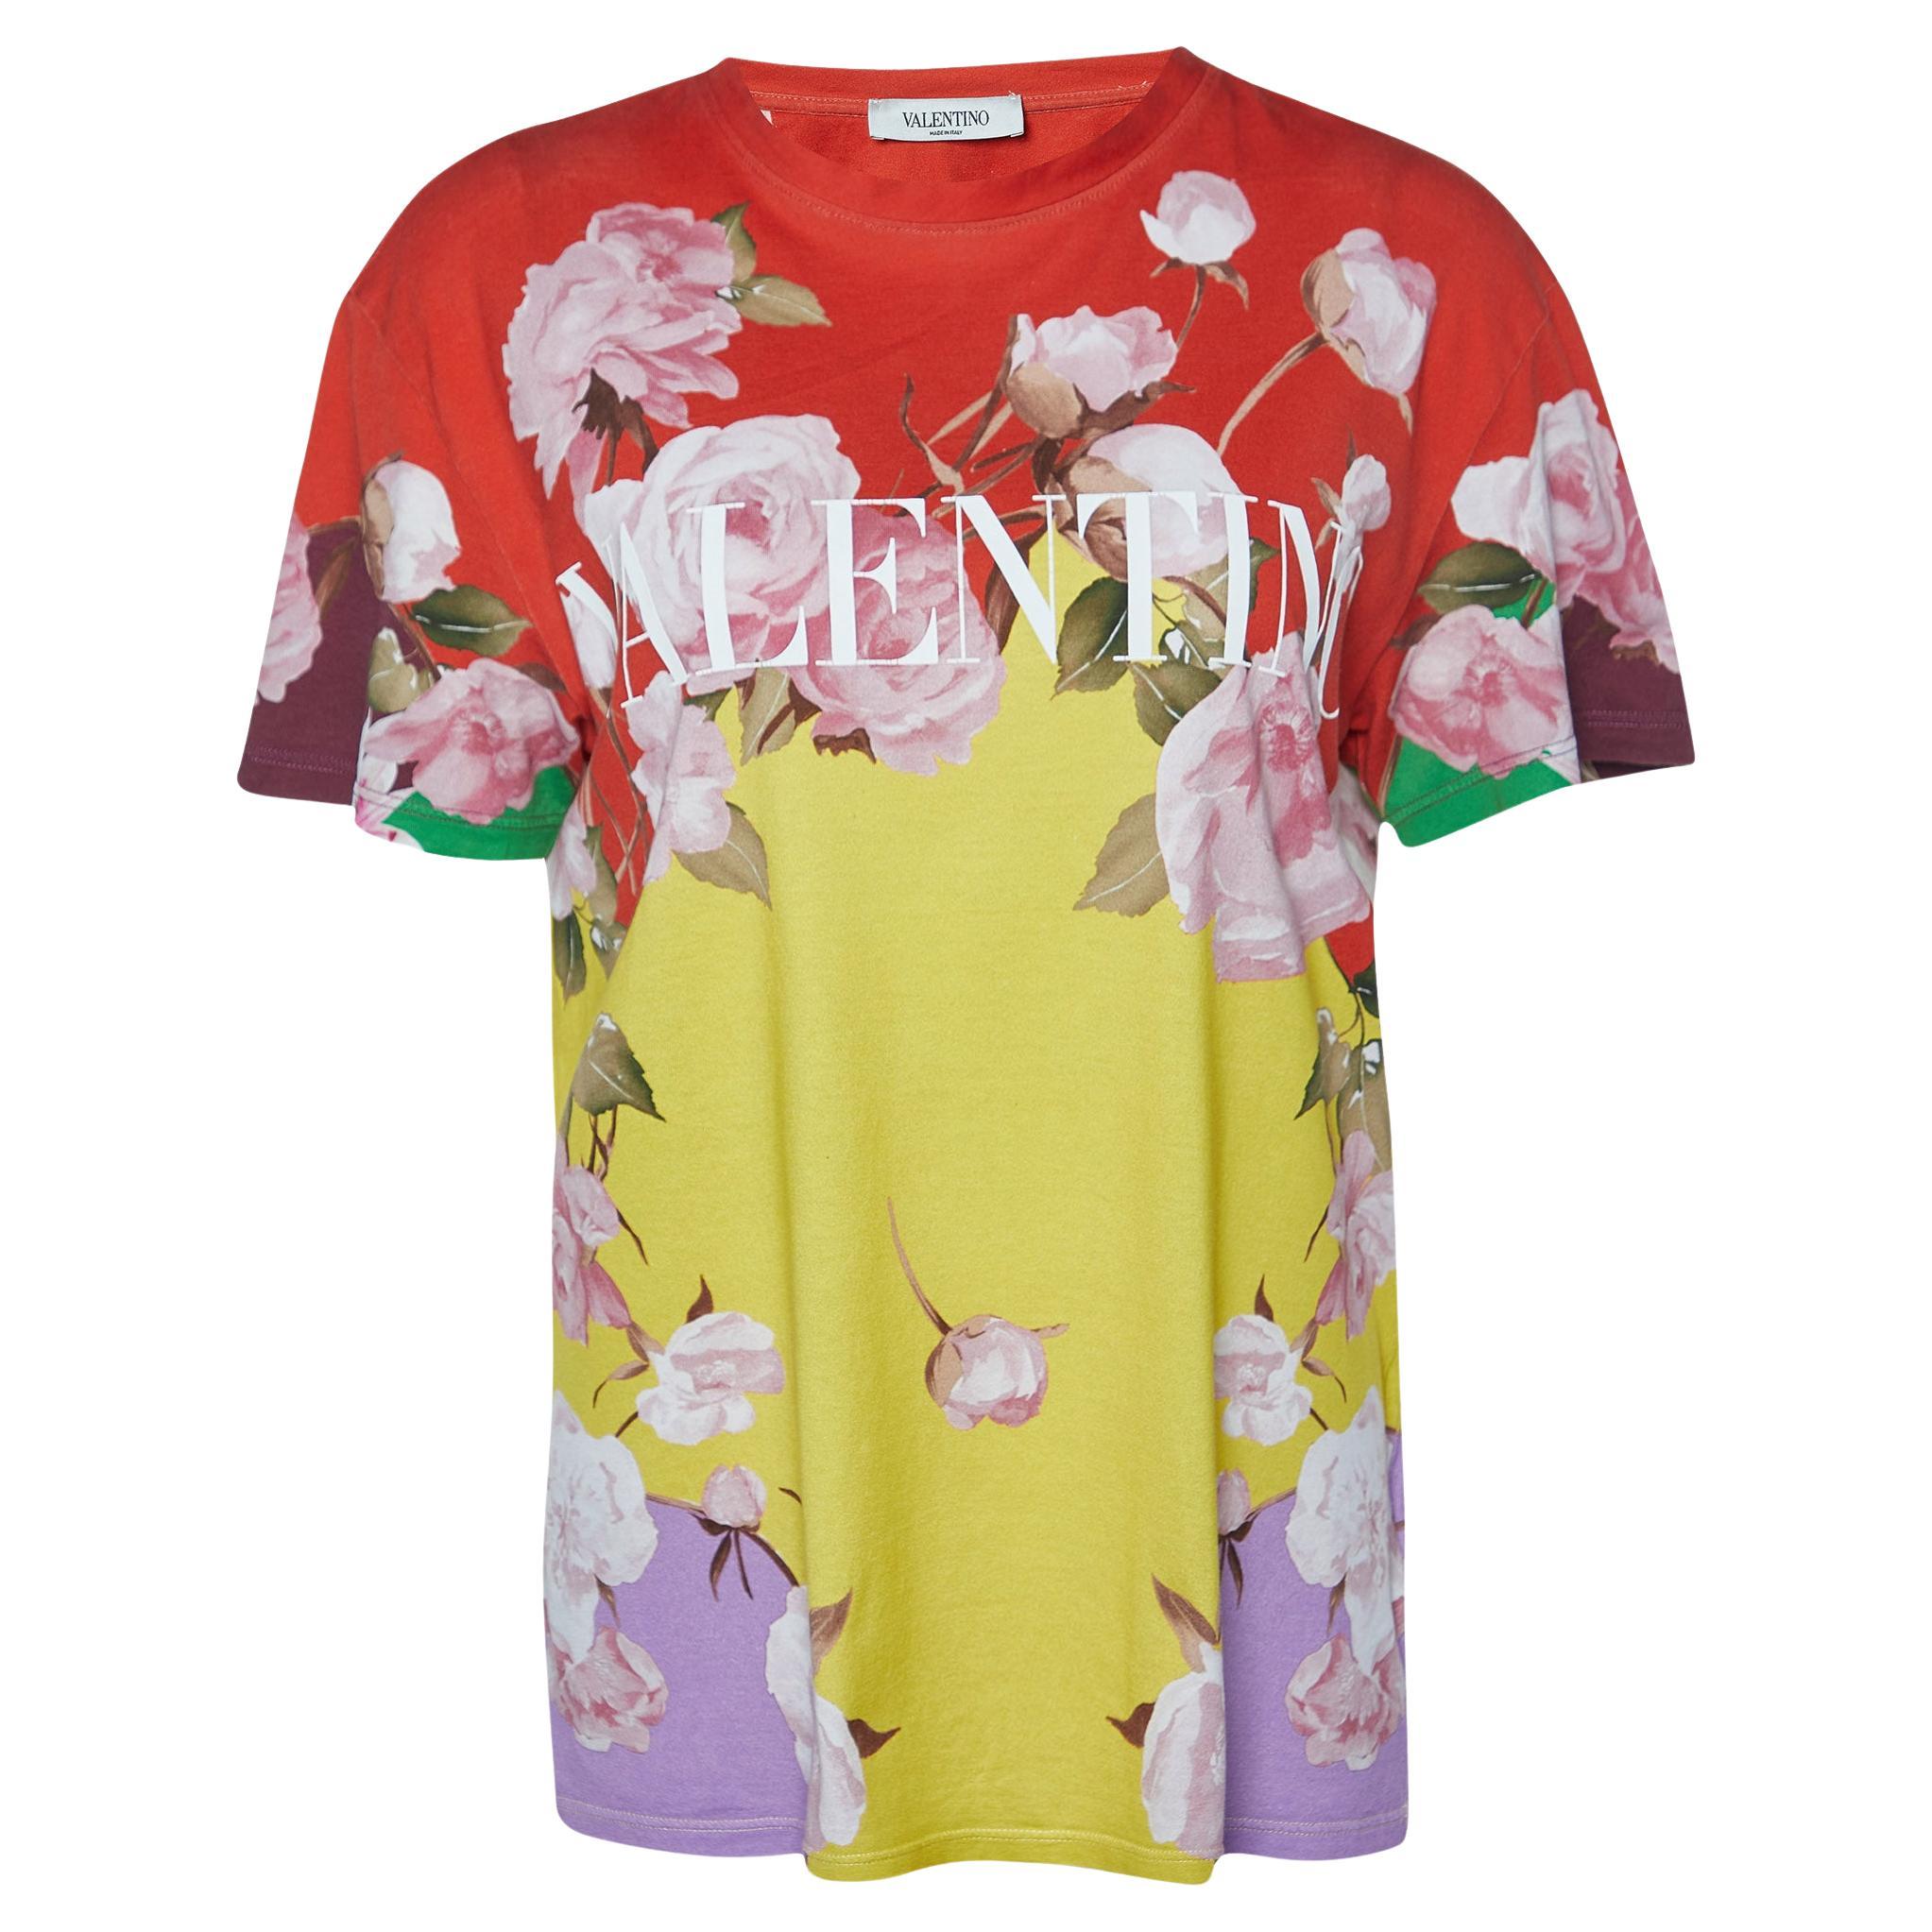 Valentino Yellow/Red Flying Flowers Print Cotton Crew Neck T-Shirt S For Sale